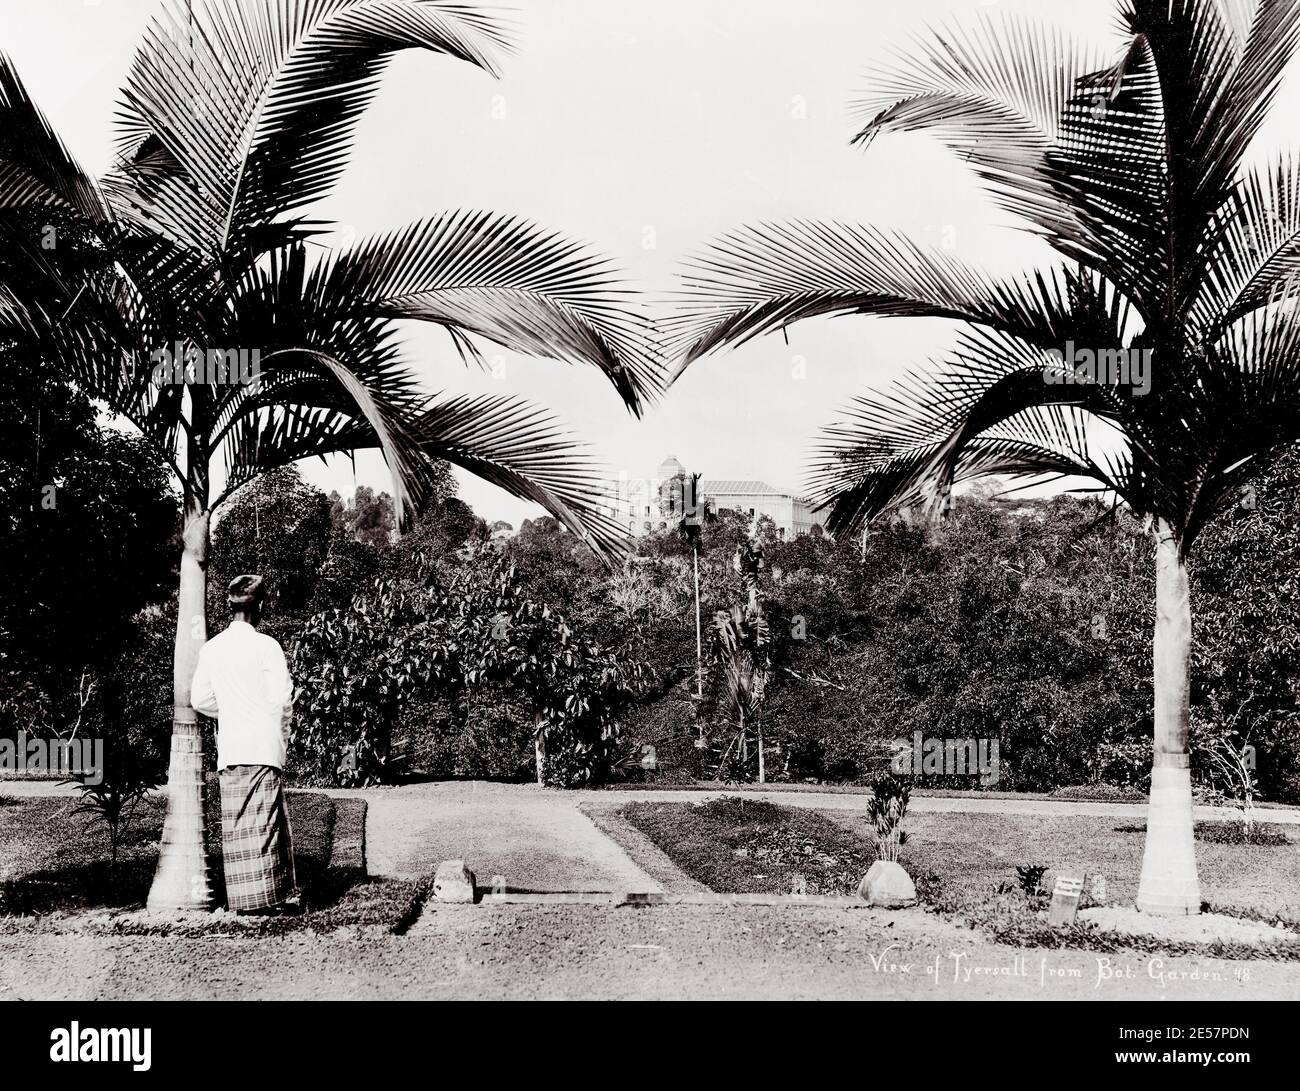 19th century vintage photograph: Tyersall from the Botanical Gardens Singapore. Istana Tyersall is a demolished historical palace that used to be located on the former Tyersall Park bound by Holland Road and Tyersall Road. Stock Photo